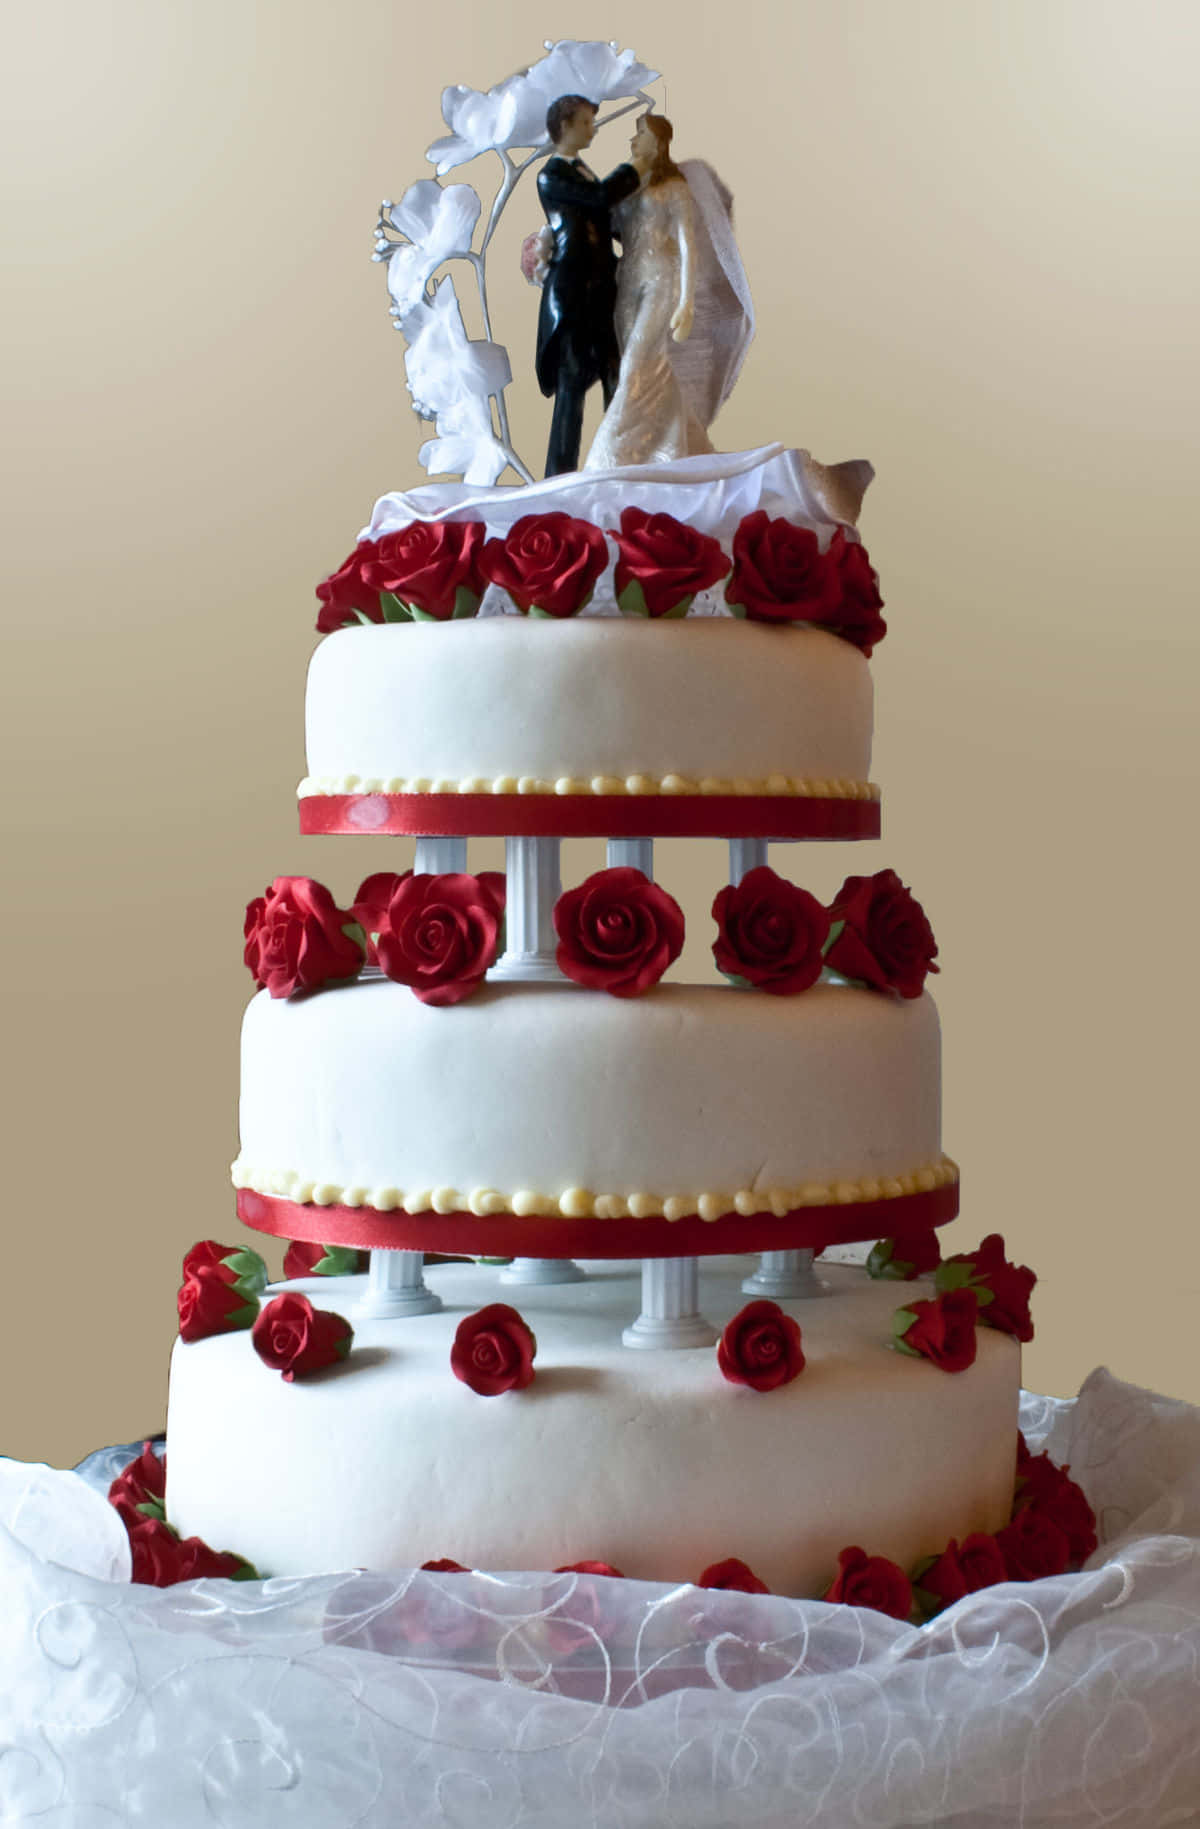 A Wedding Cake With A Couple On Top